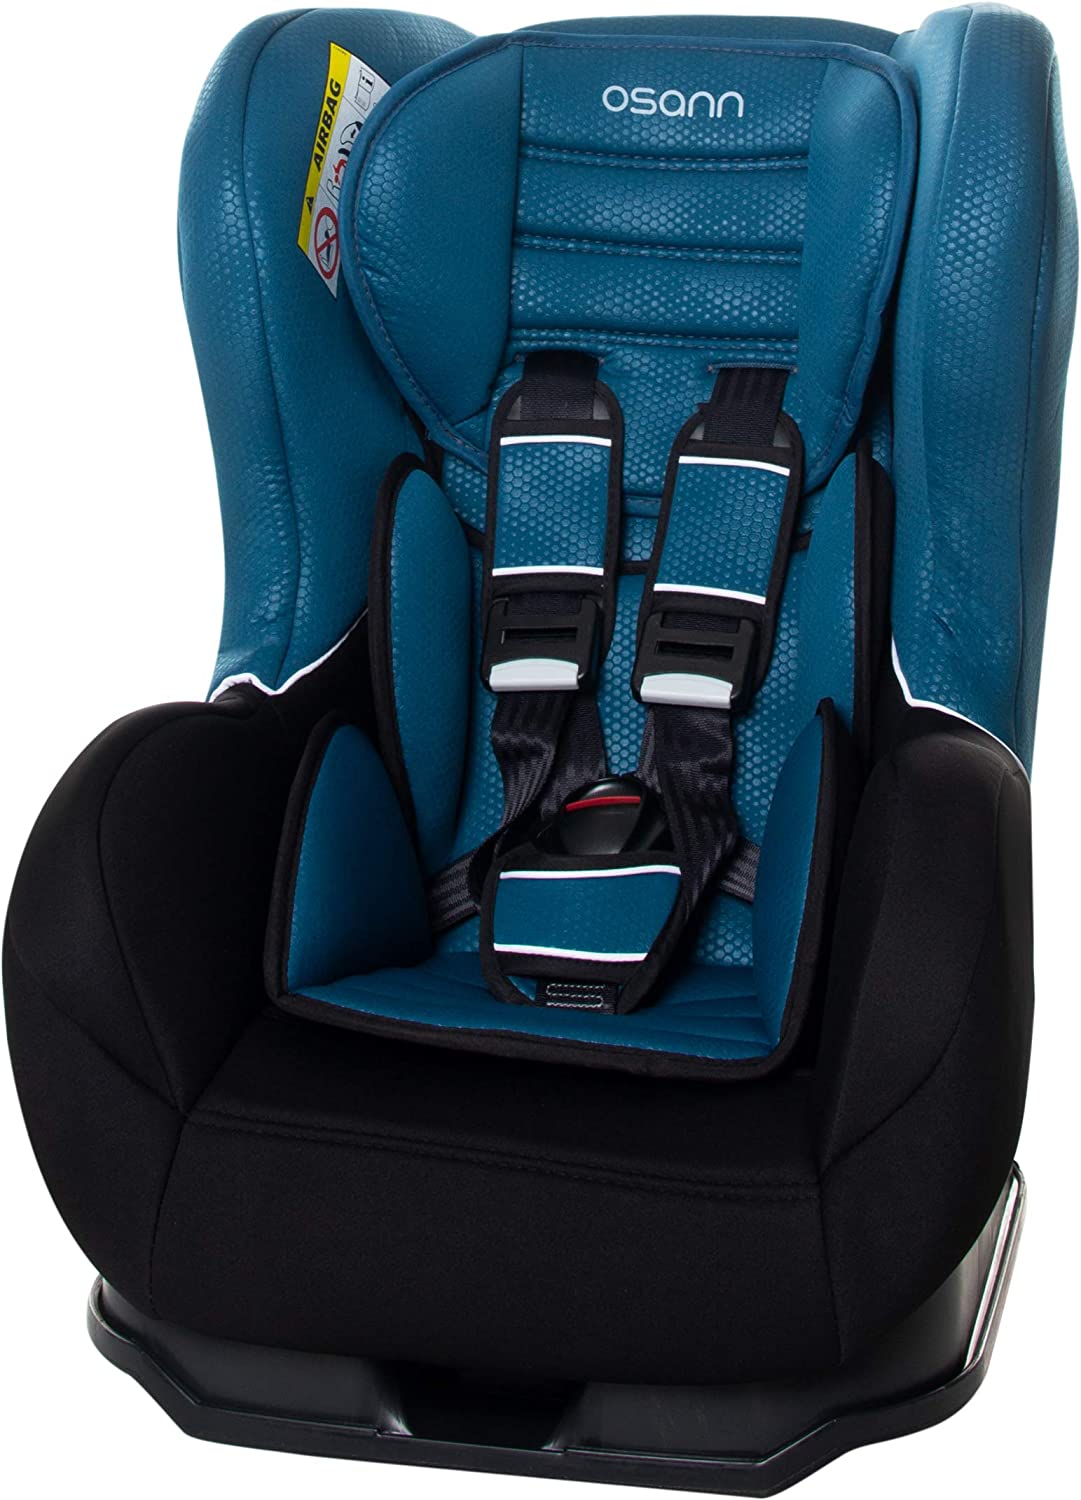 Osann Cosmo SP Child Car Seat Group 0+/1 (up to 18 kg) Blue